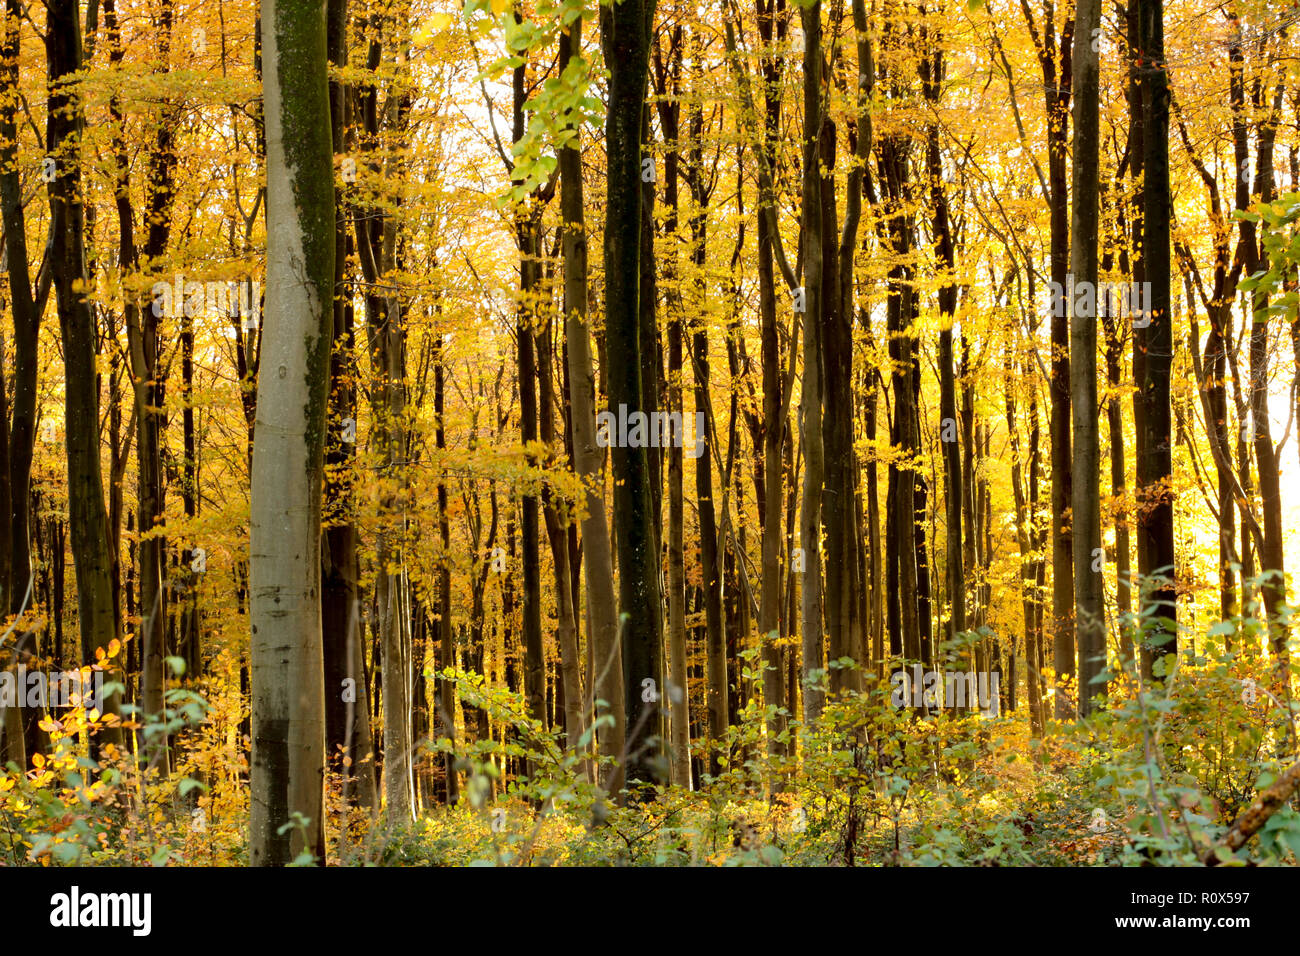 Afternoon Autumn sunlight in November shining through beech trees and leaves in woodlands. Dorset England UK GB Stock Photo